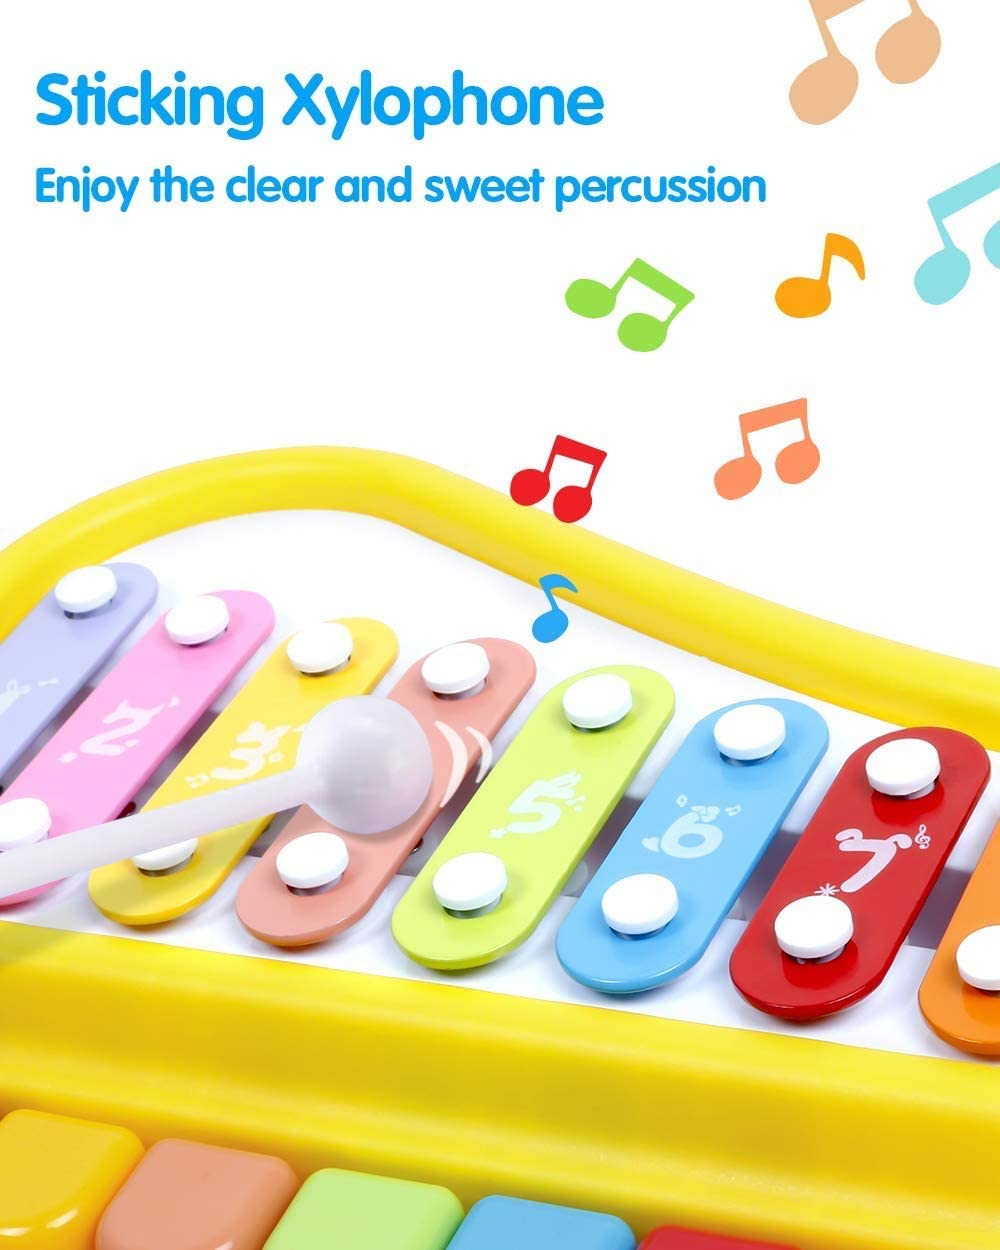 Melody Musical 8 Keys Xylophone and Piano (Red)